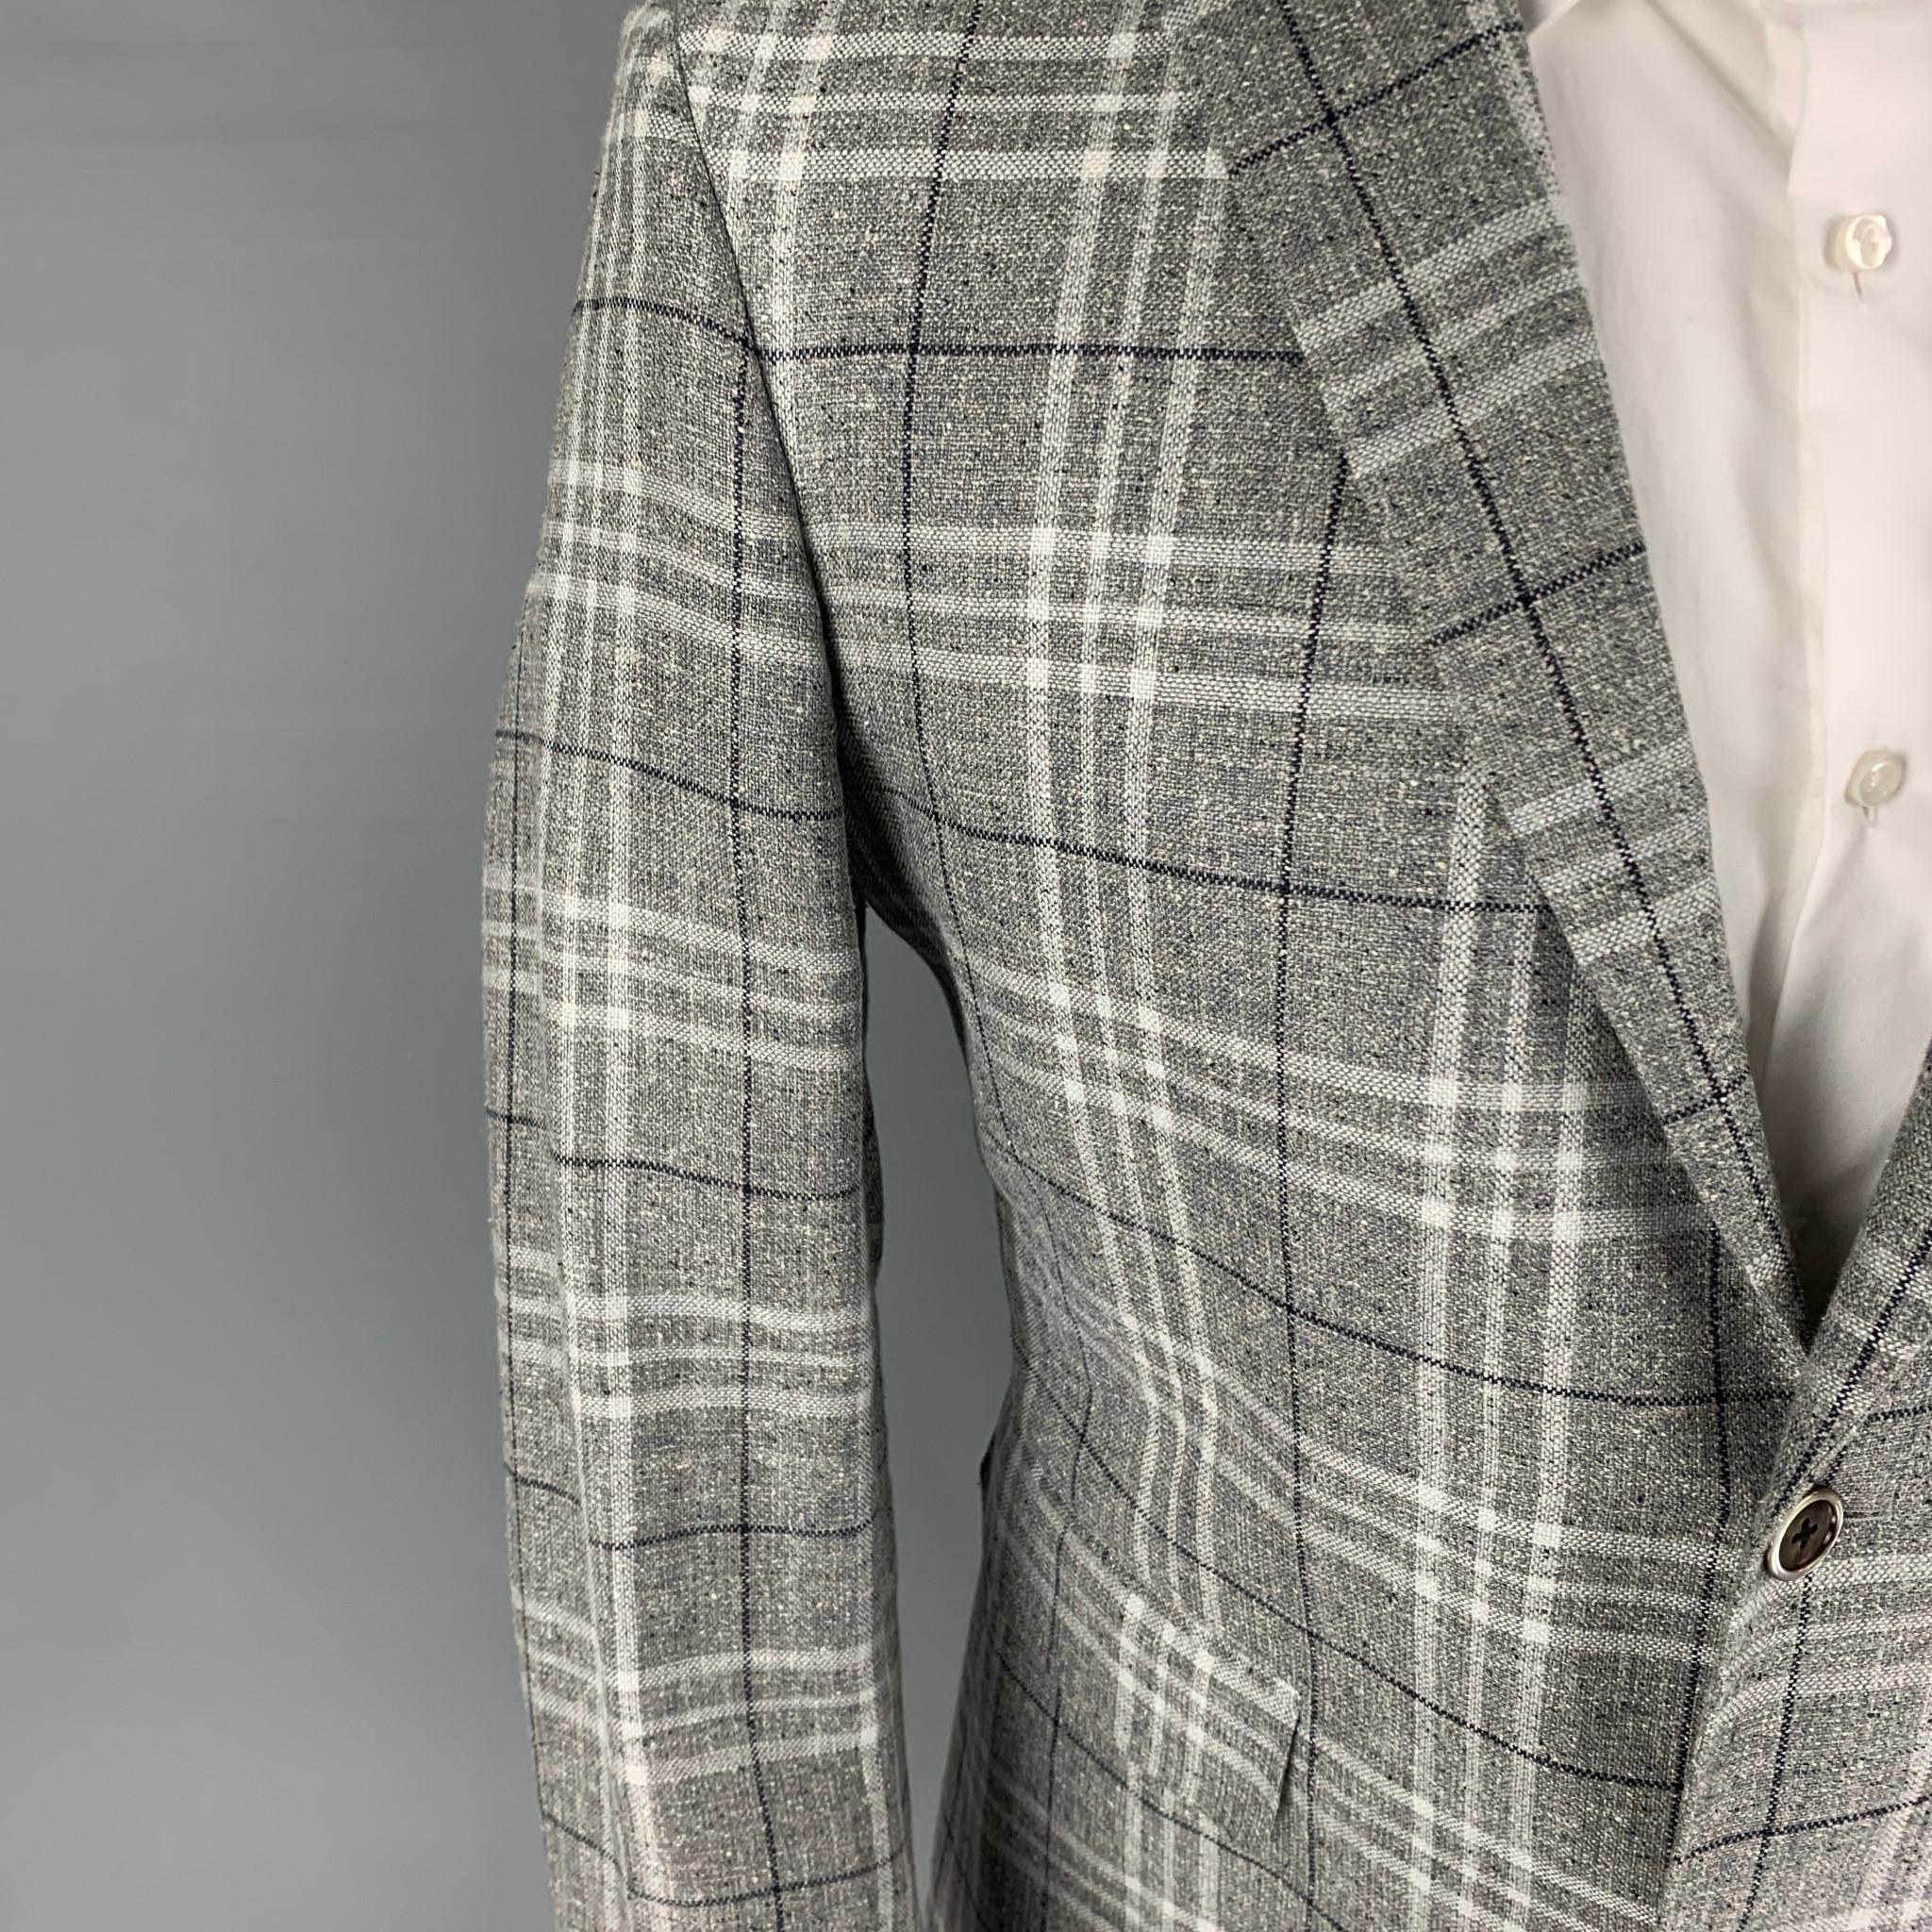 BLACK FLEECE sport coat comes in a light grey plaid silk blend with a full liner featuring a notch lapel, flap pockets, double back vent, and a double button closure. Made in USA. 

Excellent Pre-Owned Condition.
Marked: